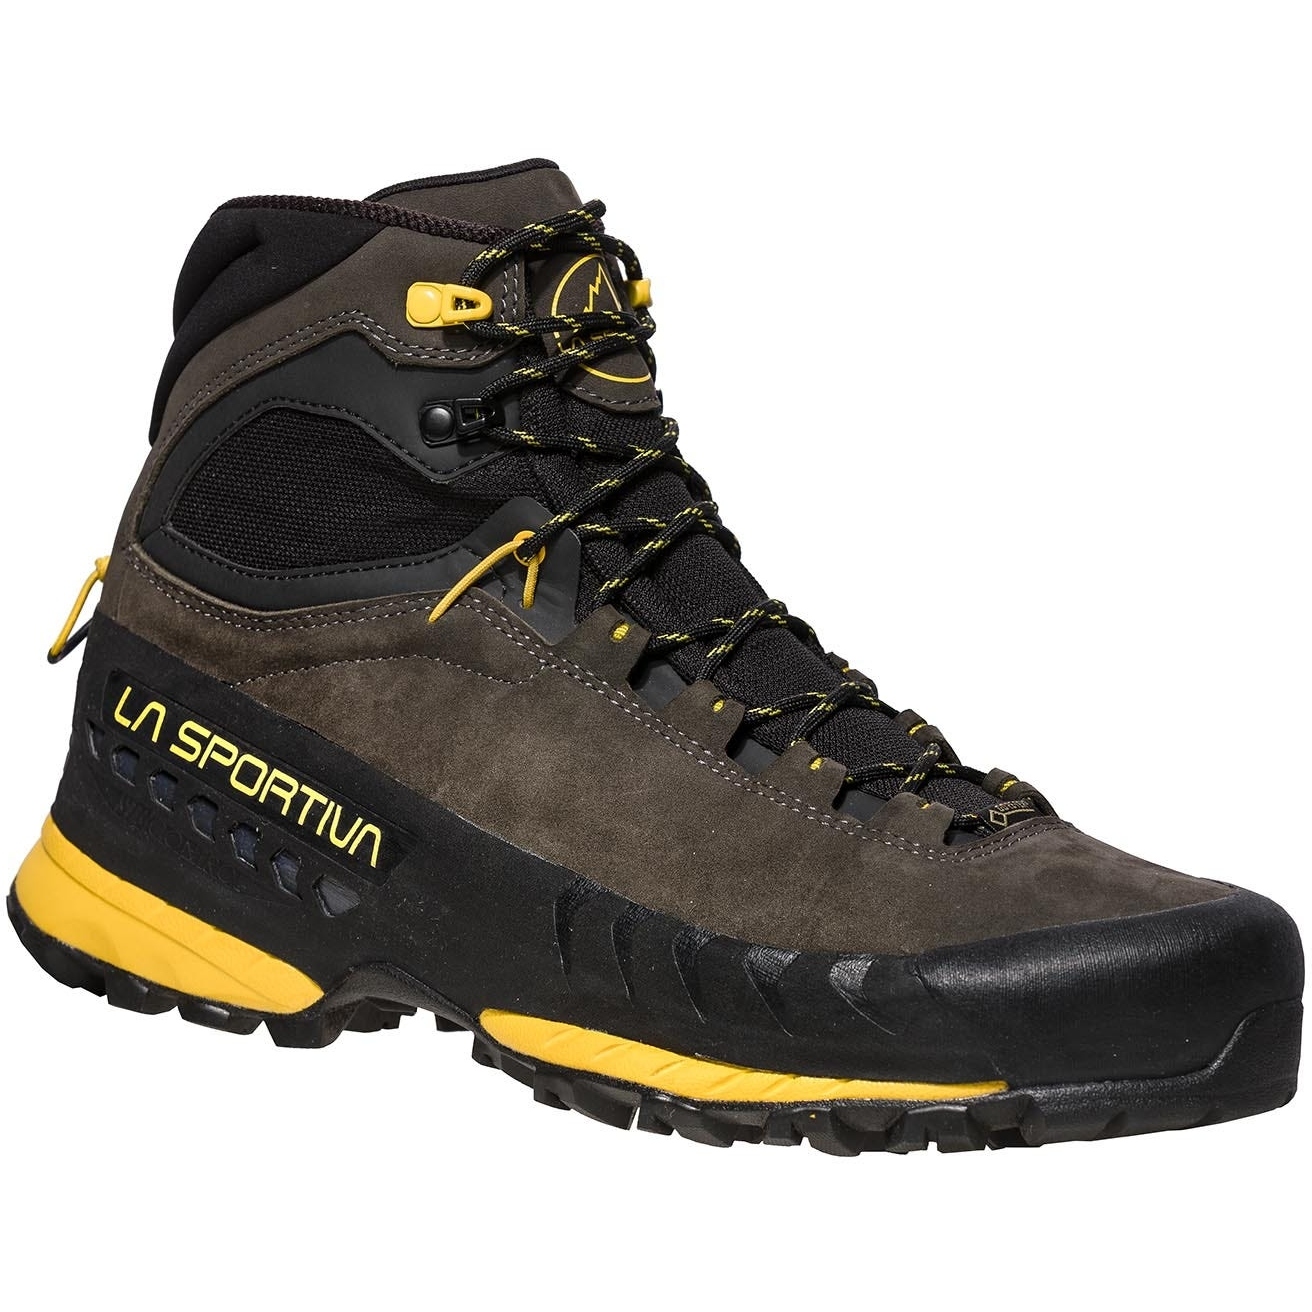 Picture of La Sportiva TX5 GTX Mountain Hiking Shoes - Carbon/Yellow